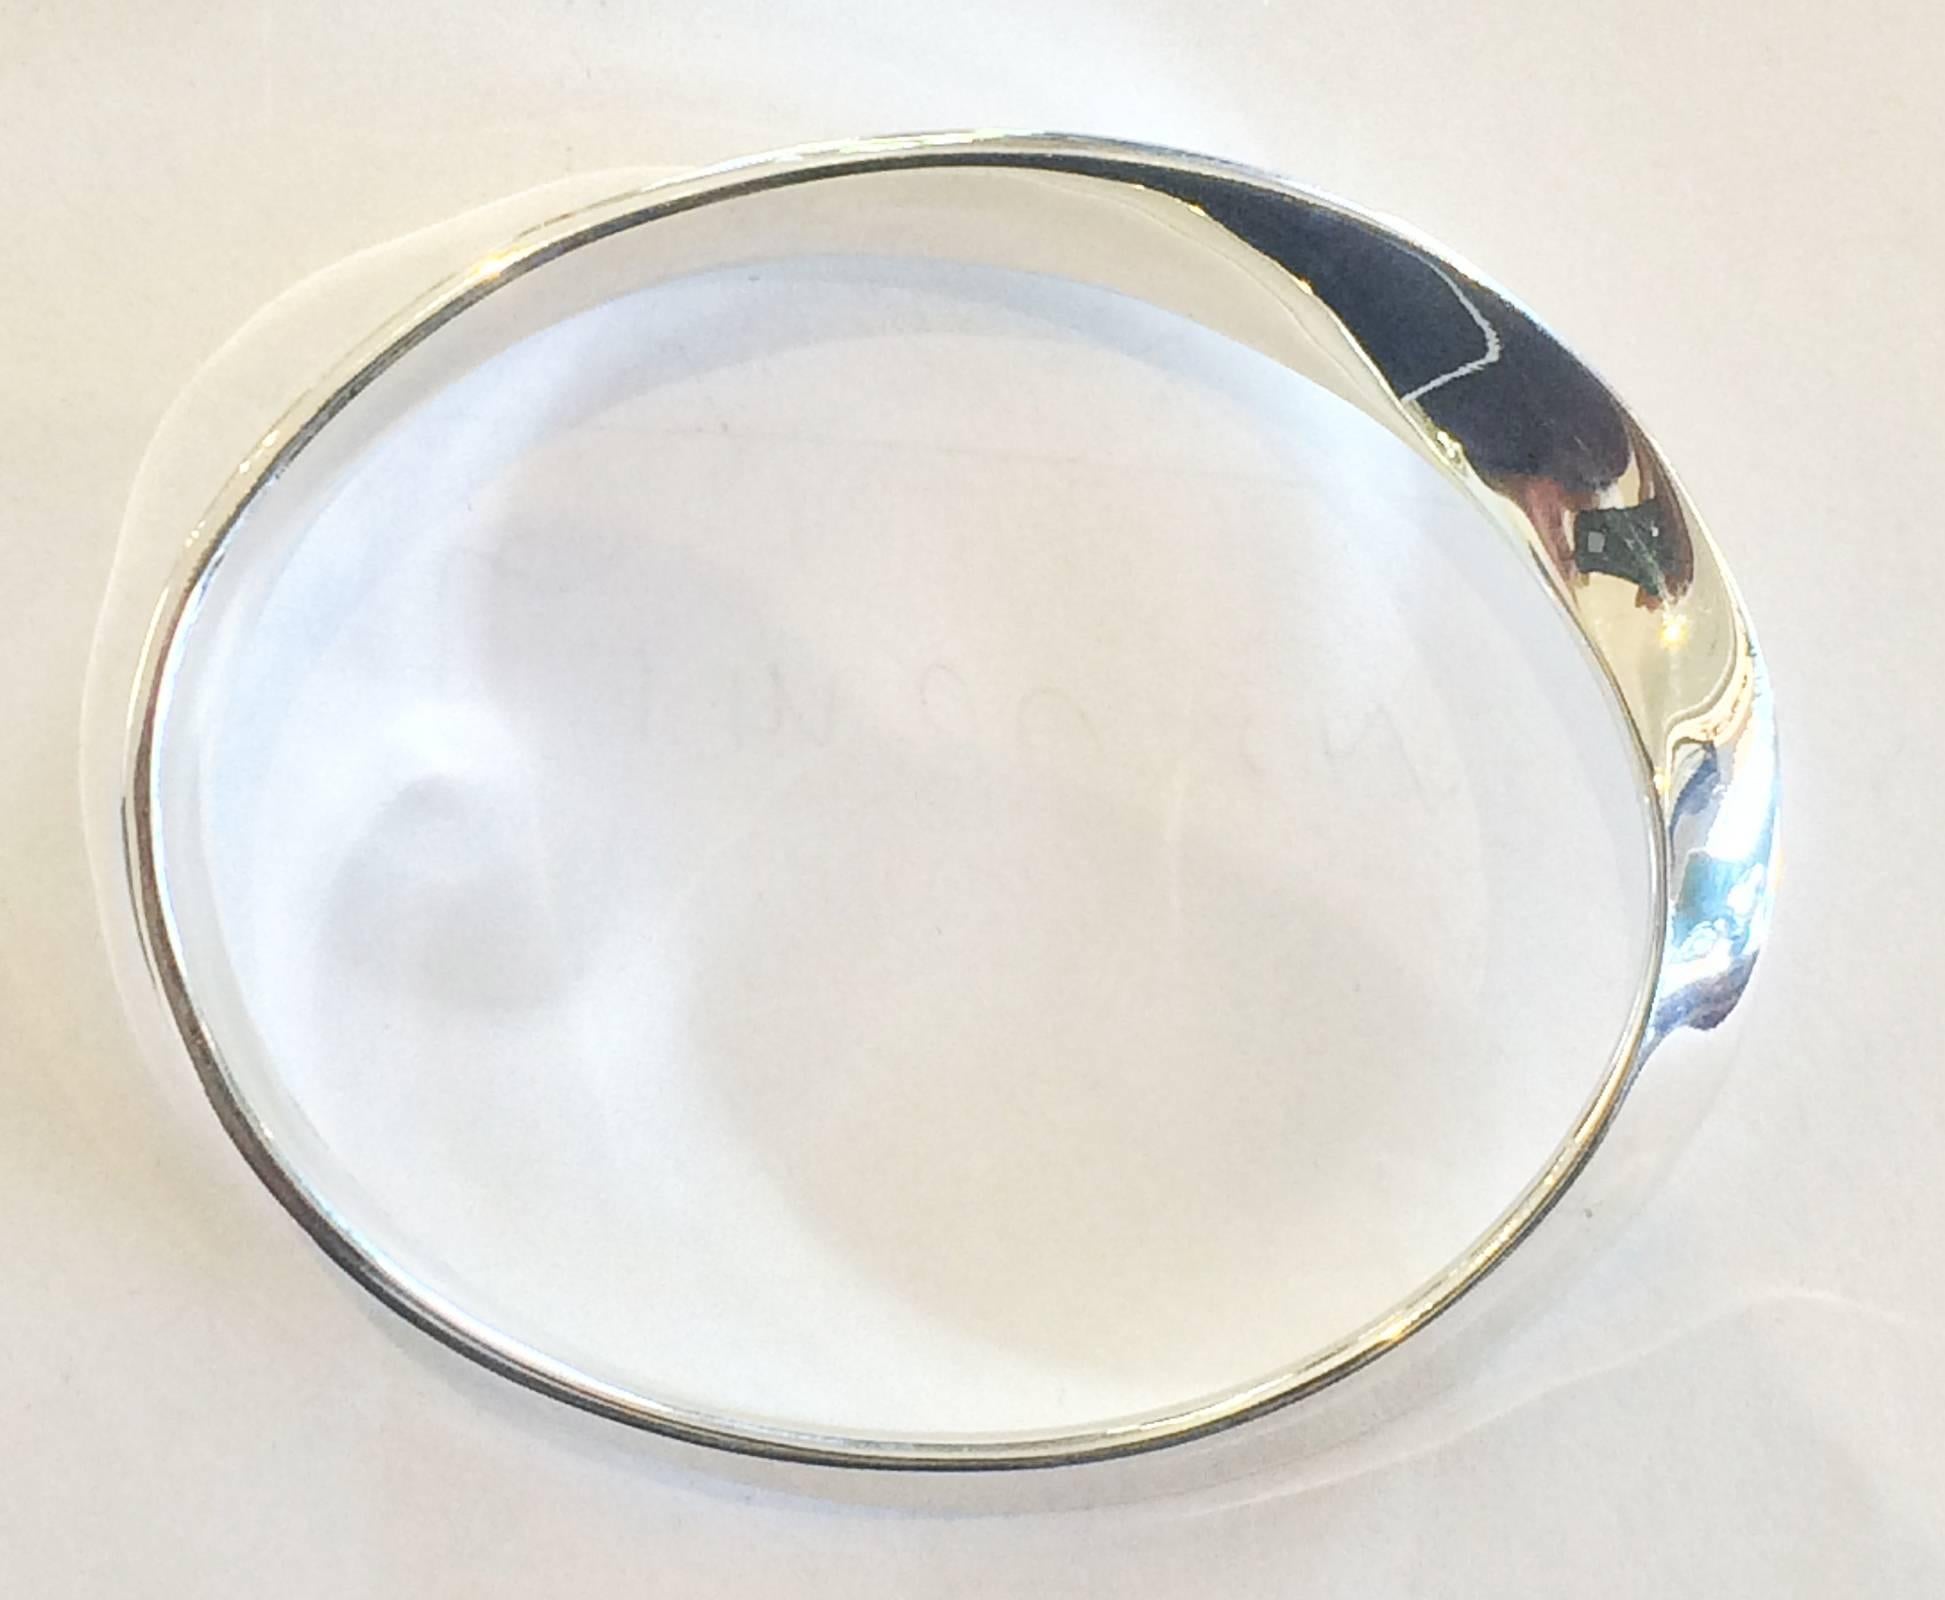 A Georg Jensen Silver MOBIUS bangle designed by Vivianna Torun Bülow-Hübe. In math, a MÖBIUS is a shape with one surface and one edge. Launched in 1968, MÖBIUS is a great example of Georg Jensen design from the mid to late 20th century  This is